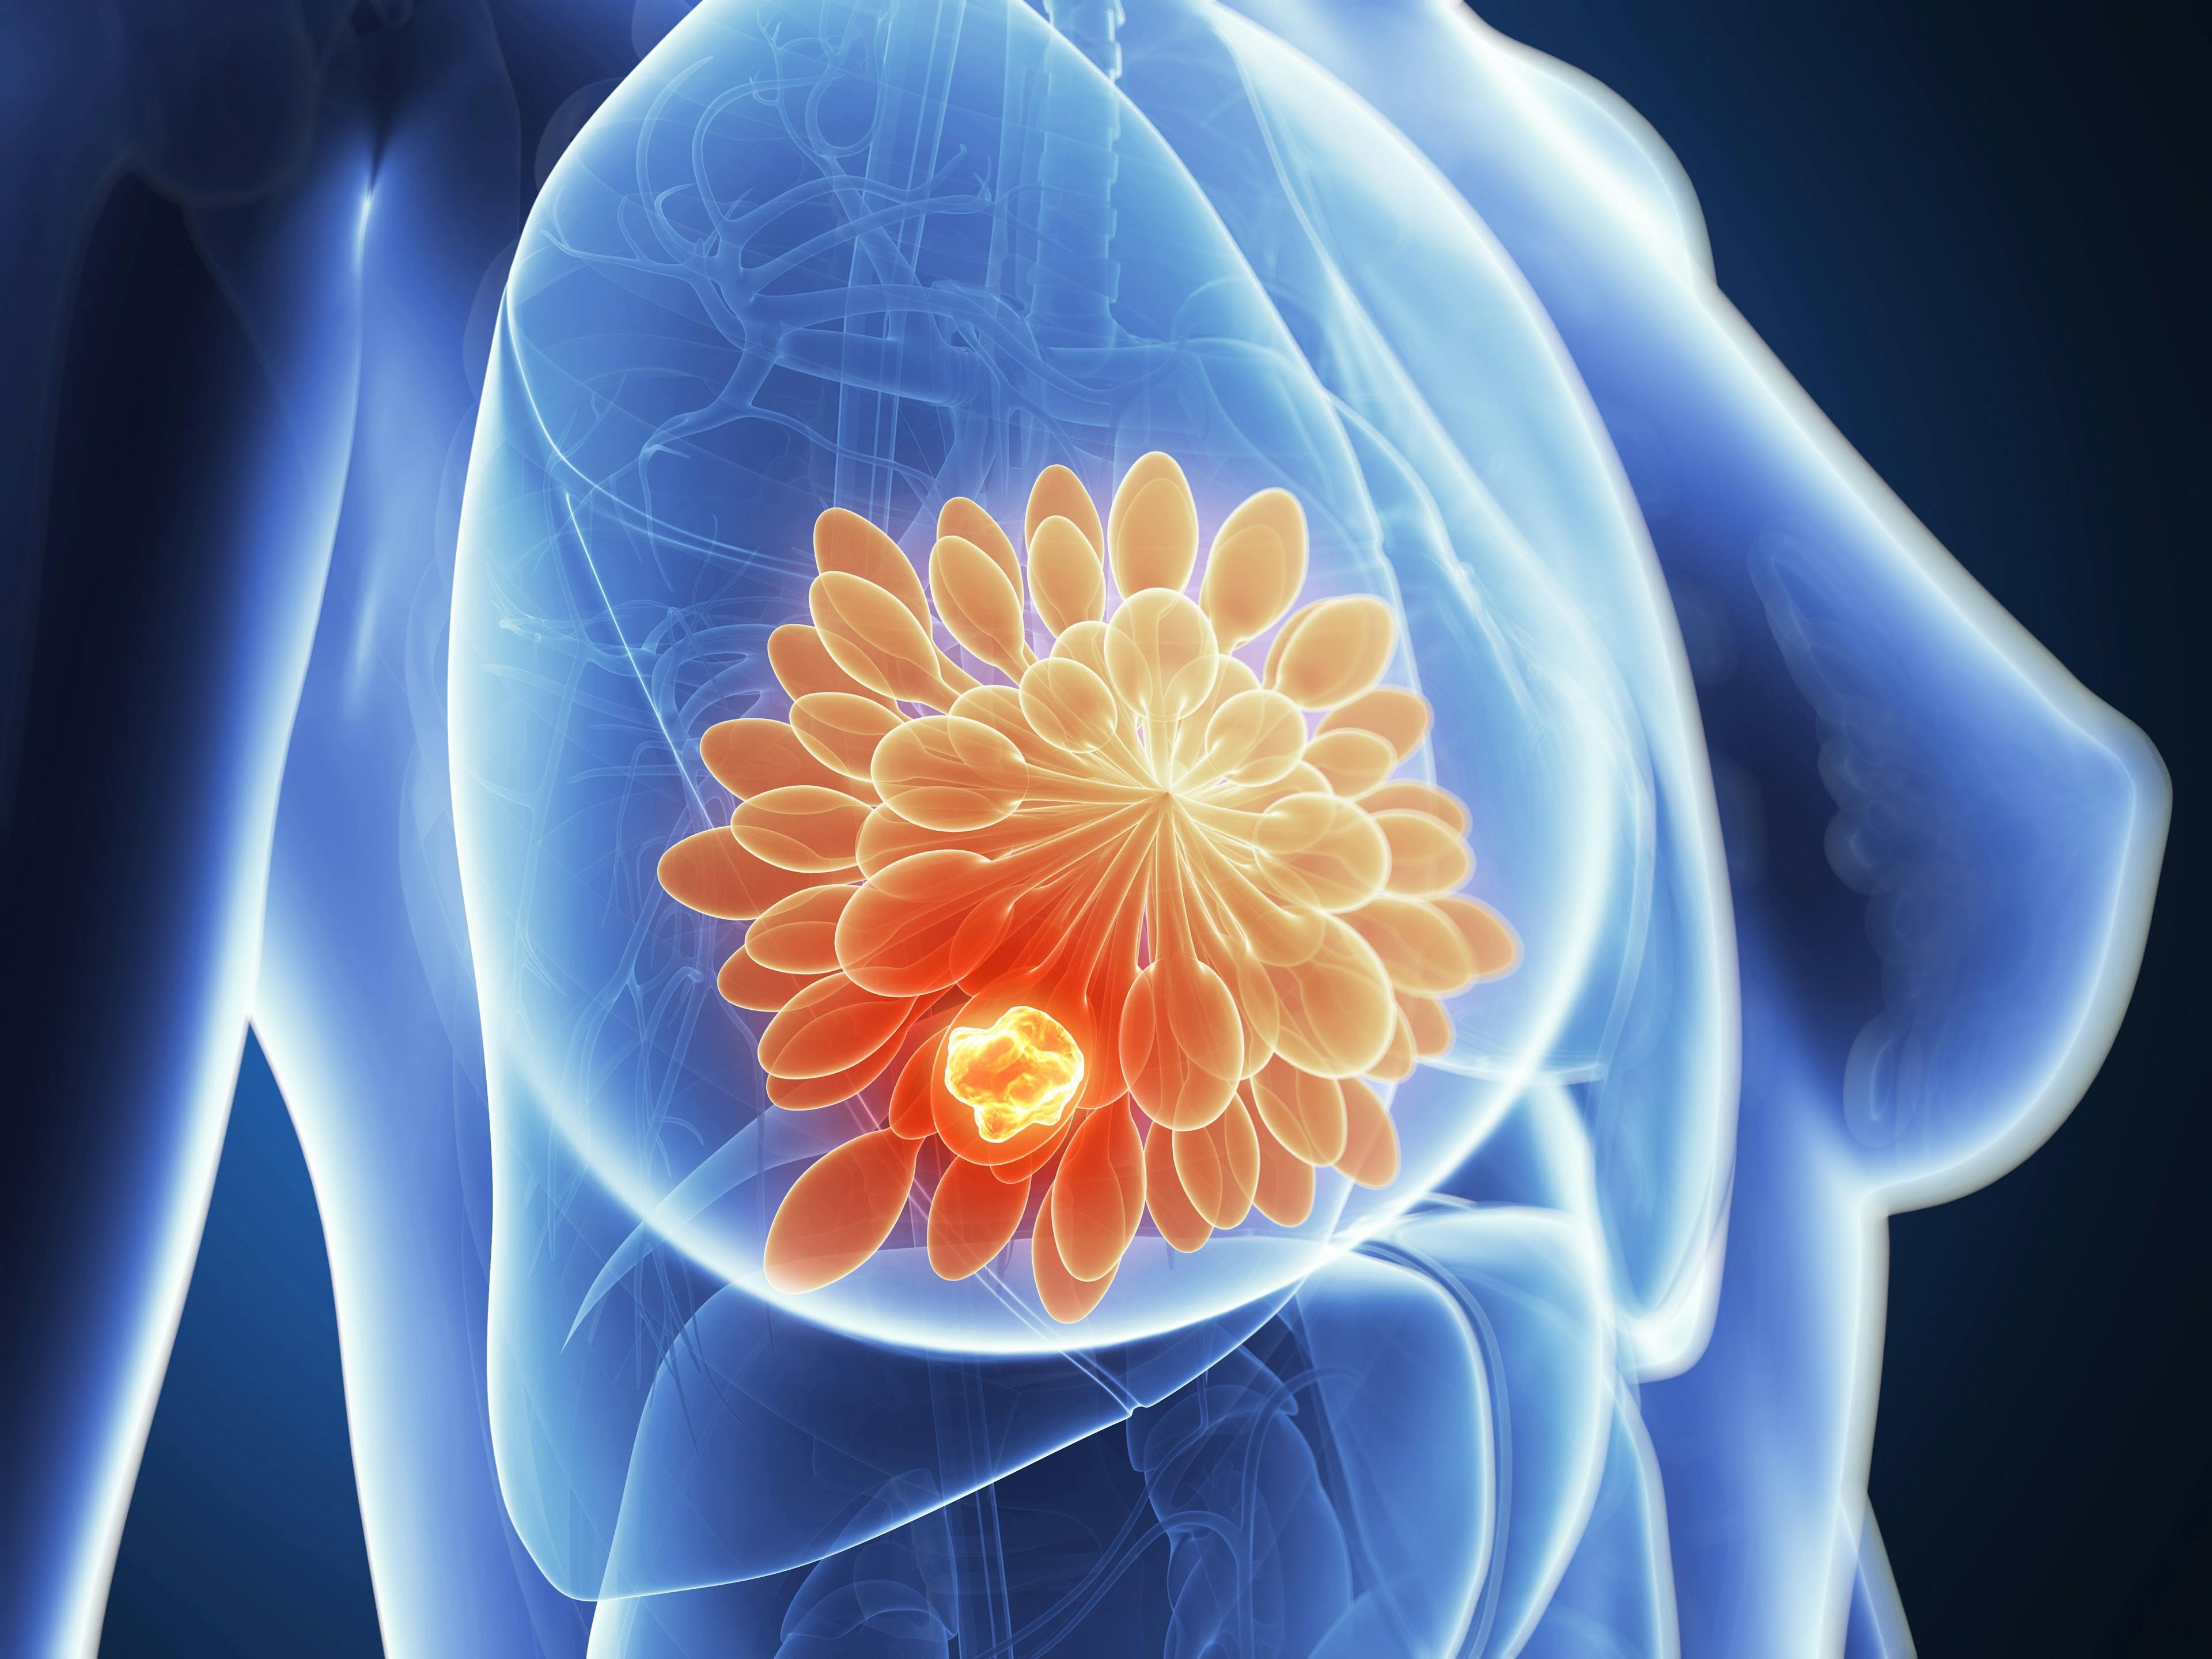 Therapeutic Choices for Patients With HR-Positive, HER2-Low Breast Cancer